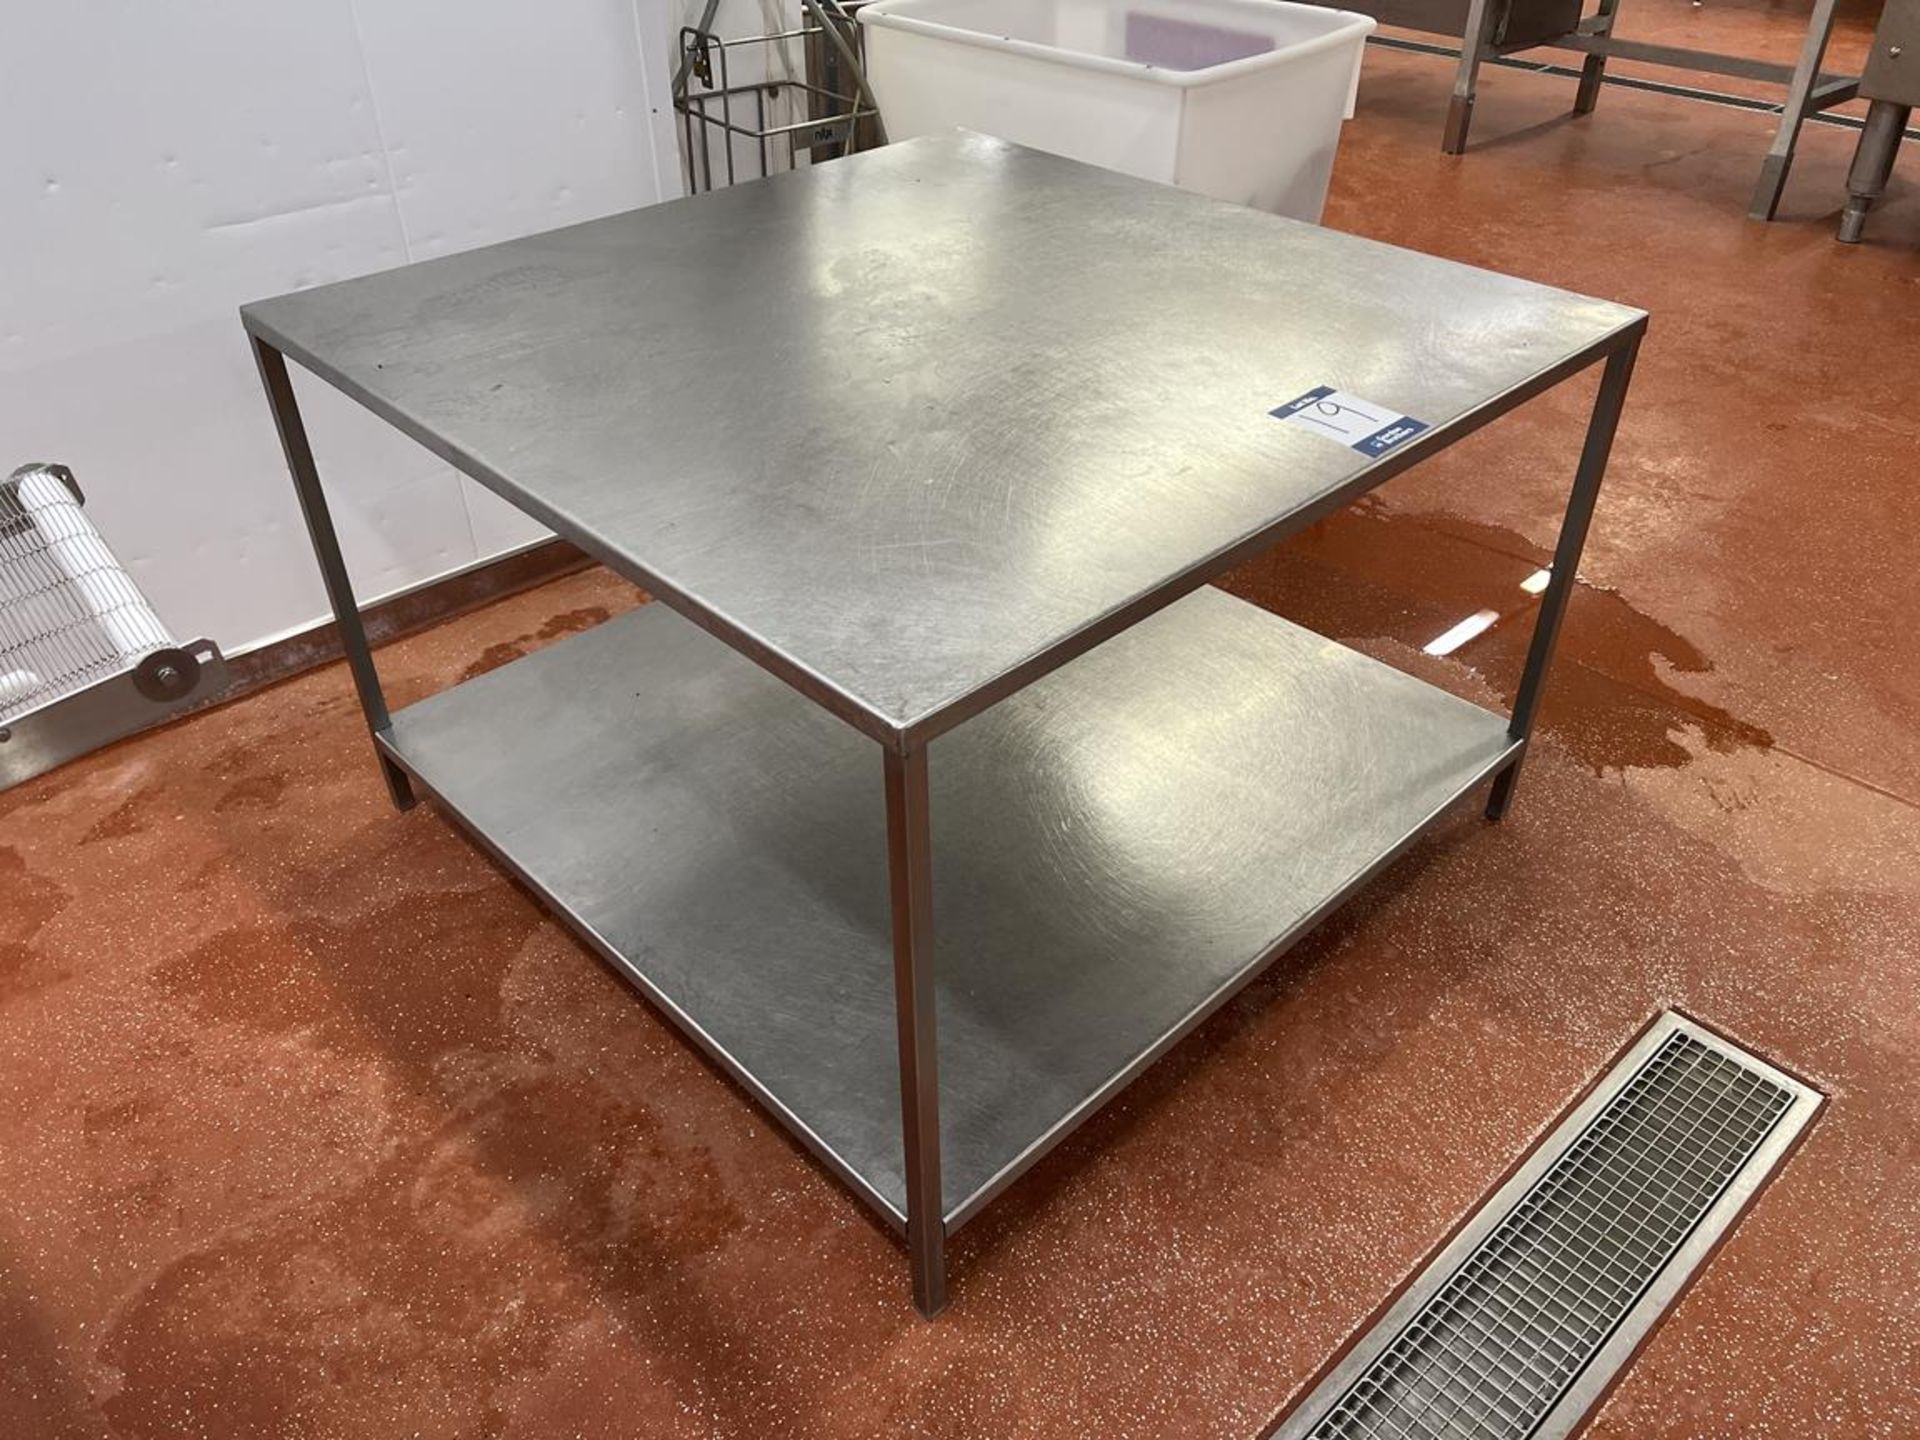 Two tier, stainless steel preparation table, 1200 x 1200mm - Image 2 of 4